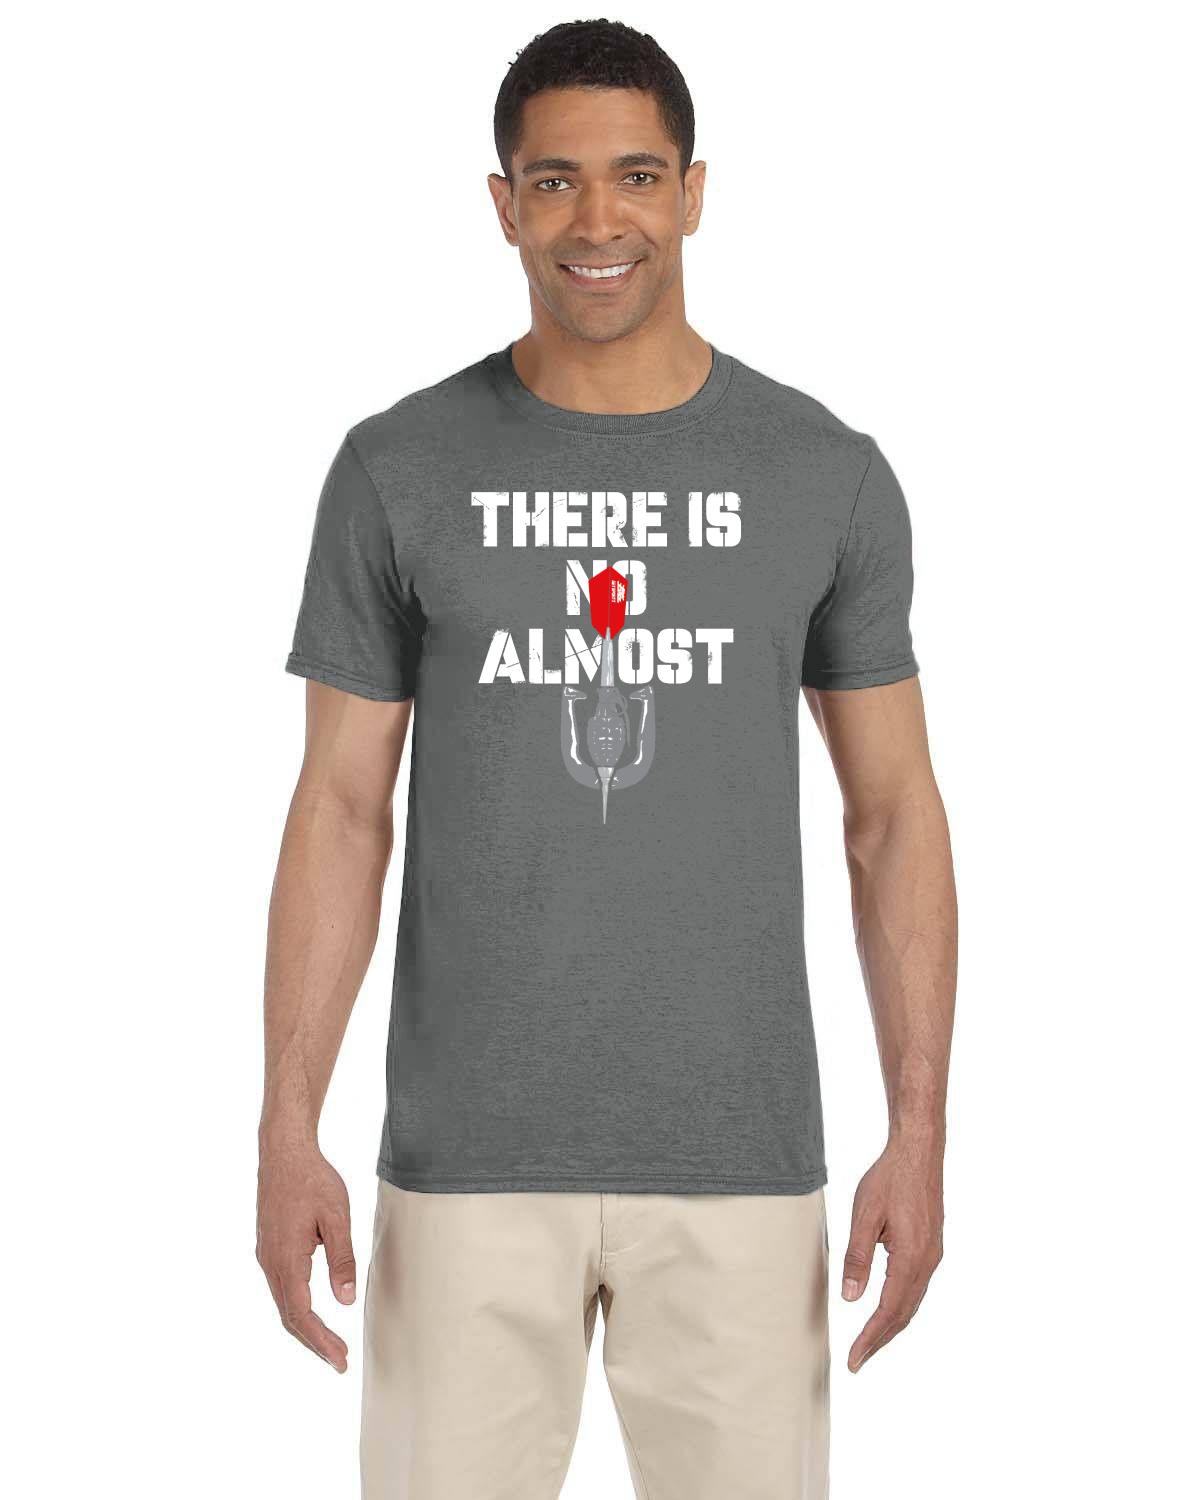 THERE IS NO ALMOST (HORSESHOES AND HAND GRENADES) Gildan Adult Softstyle 7.5 oz./lin. yd. T-Shirt | G640